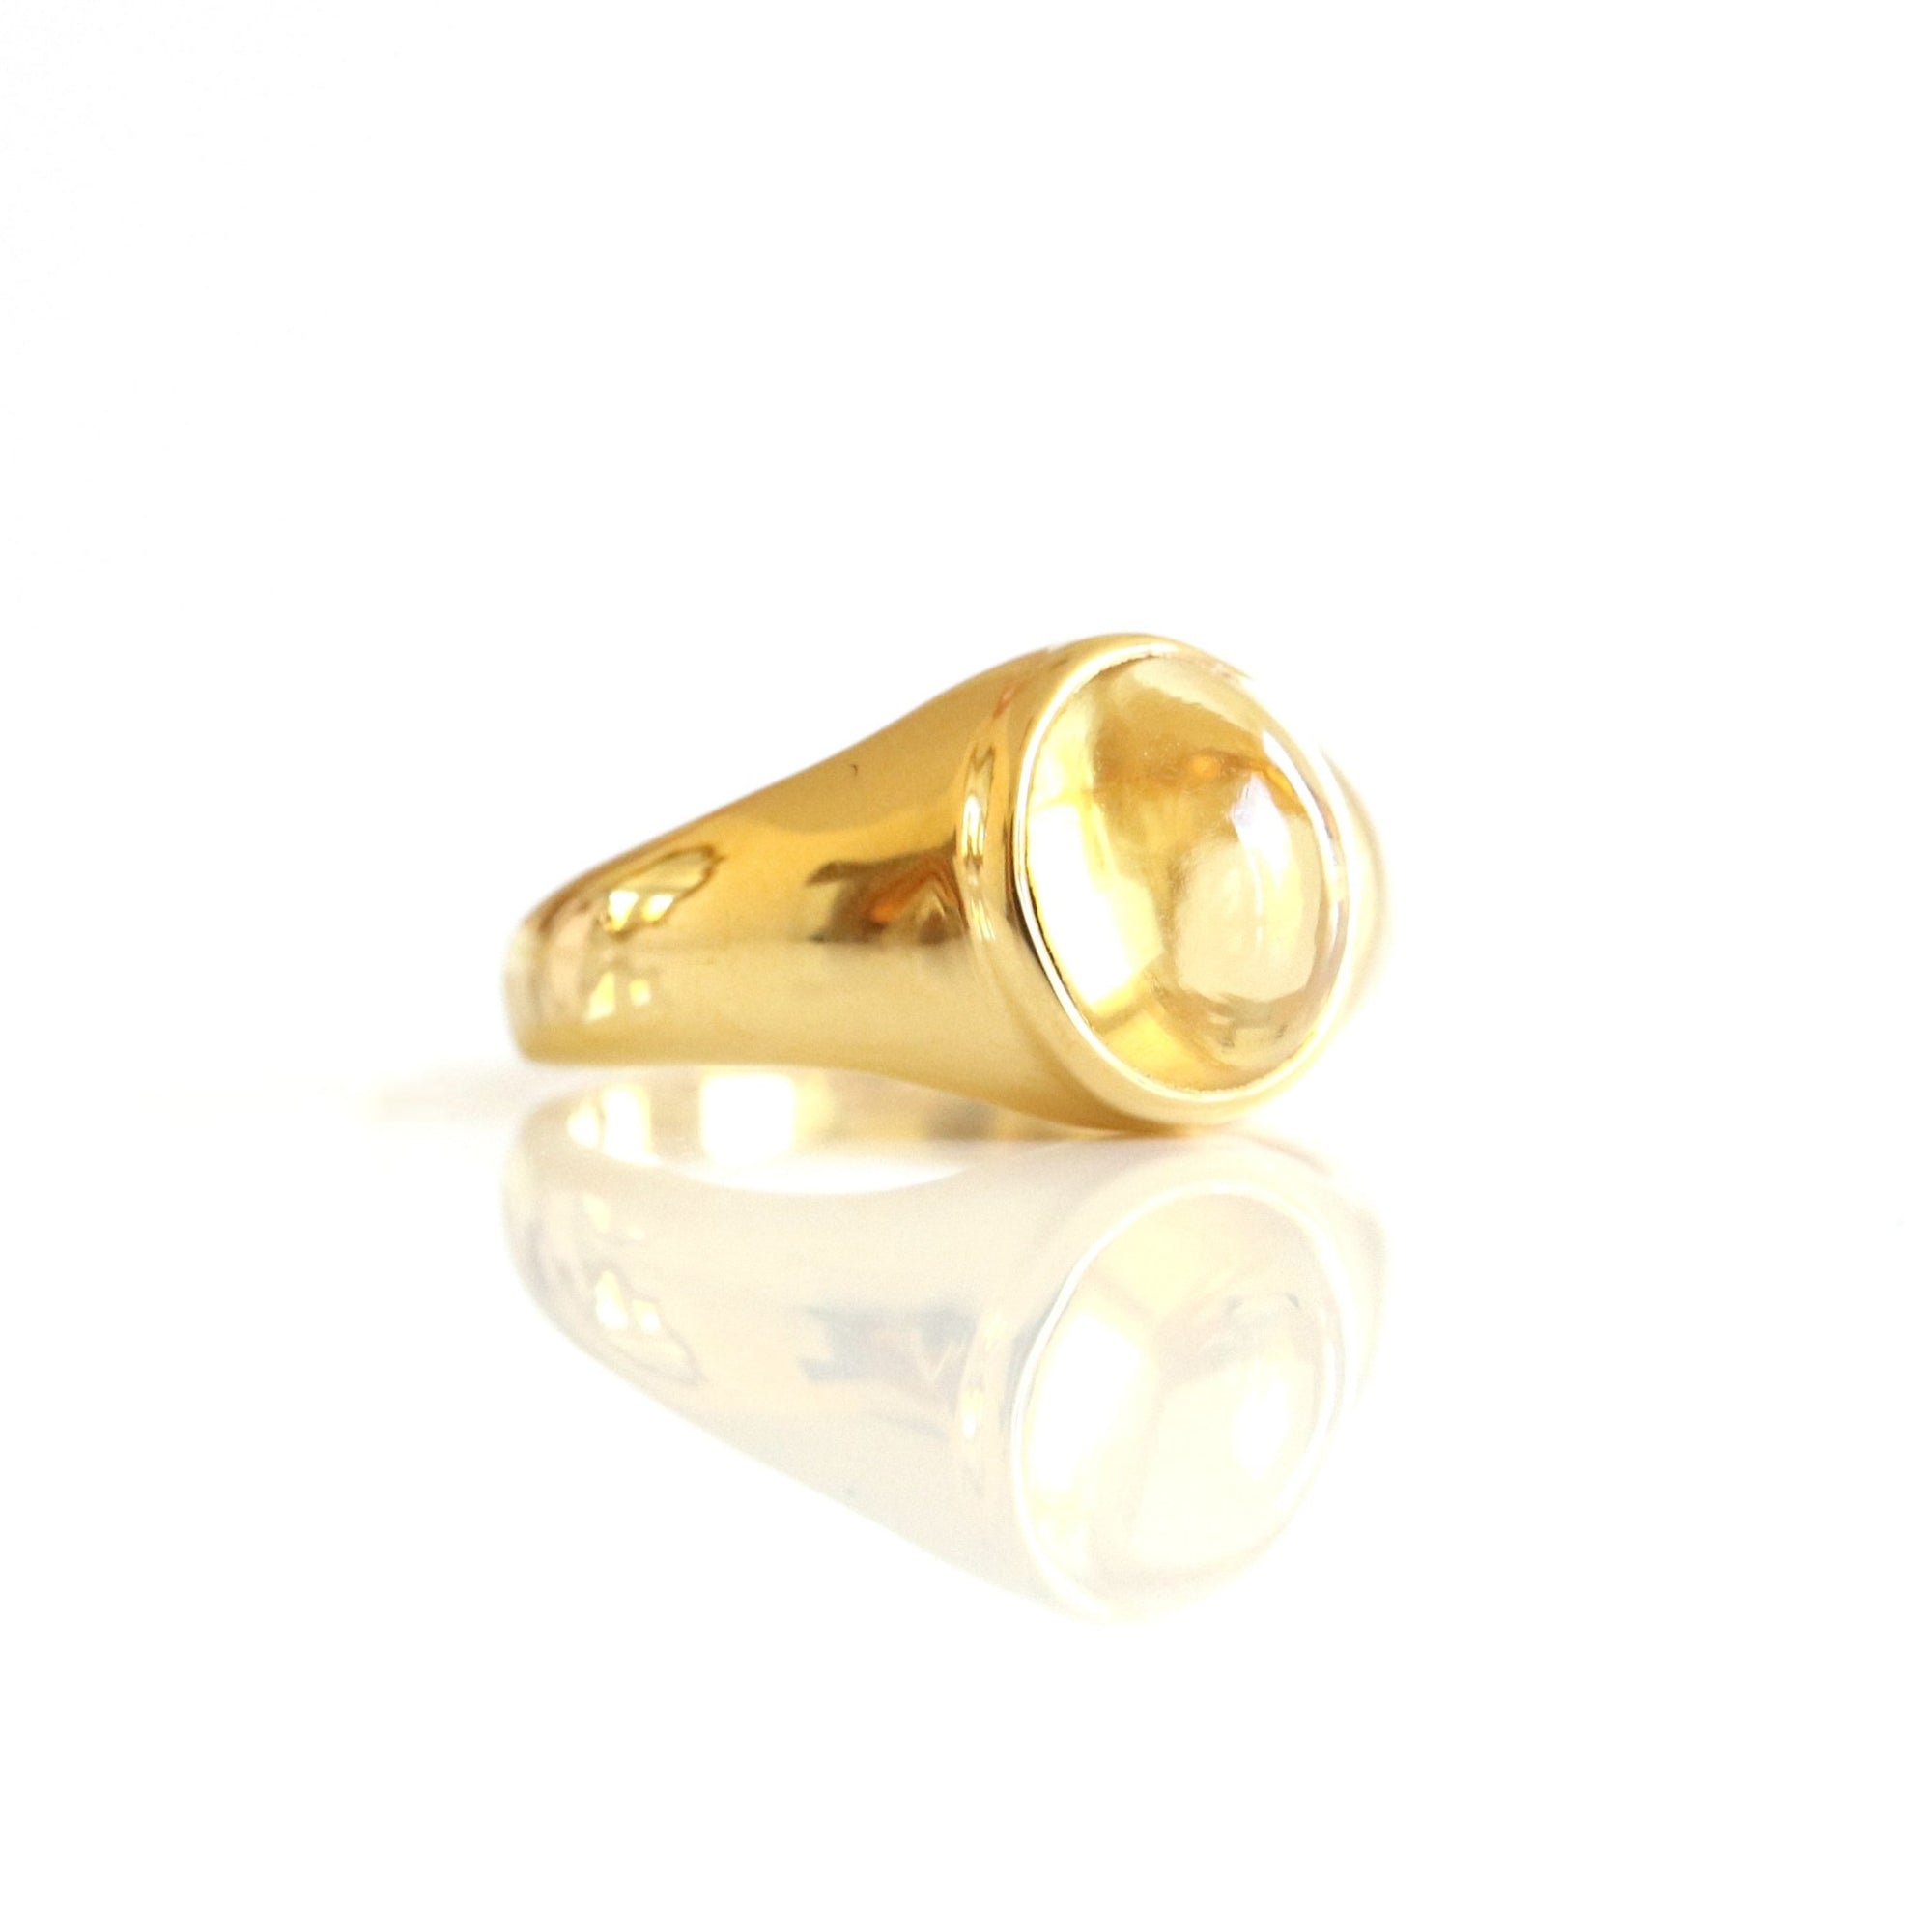 GLEE OVAL SIGNET RING - CITRINE & GOLD - SO PRETTY CARA COTTER